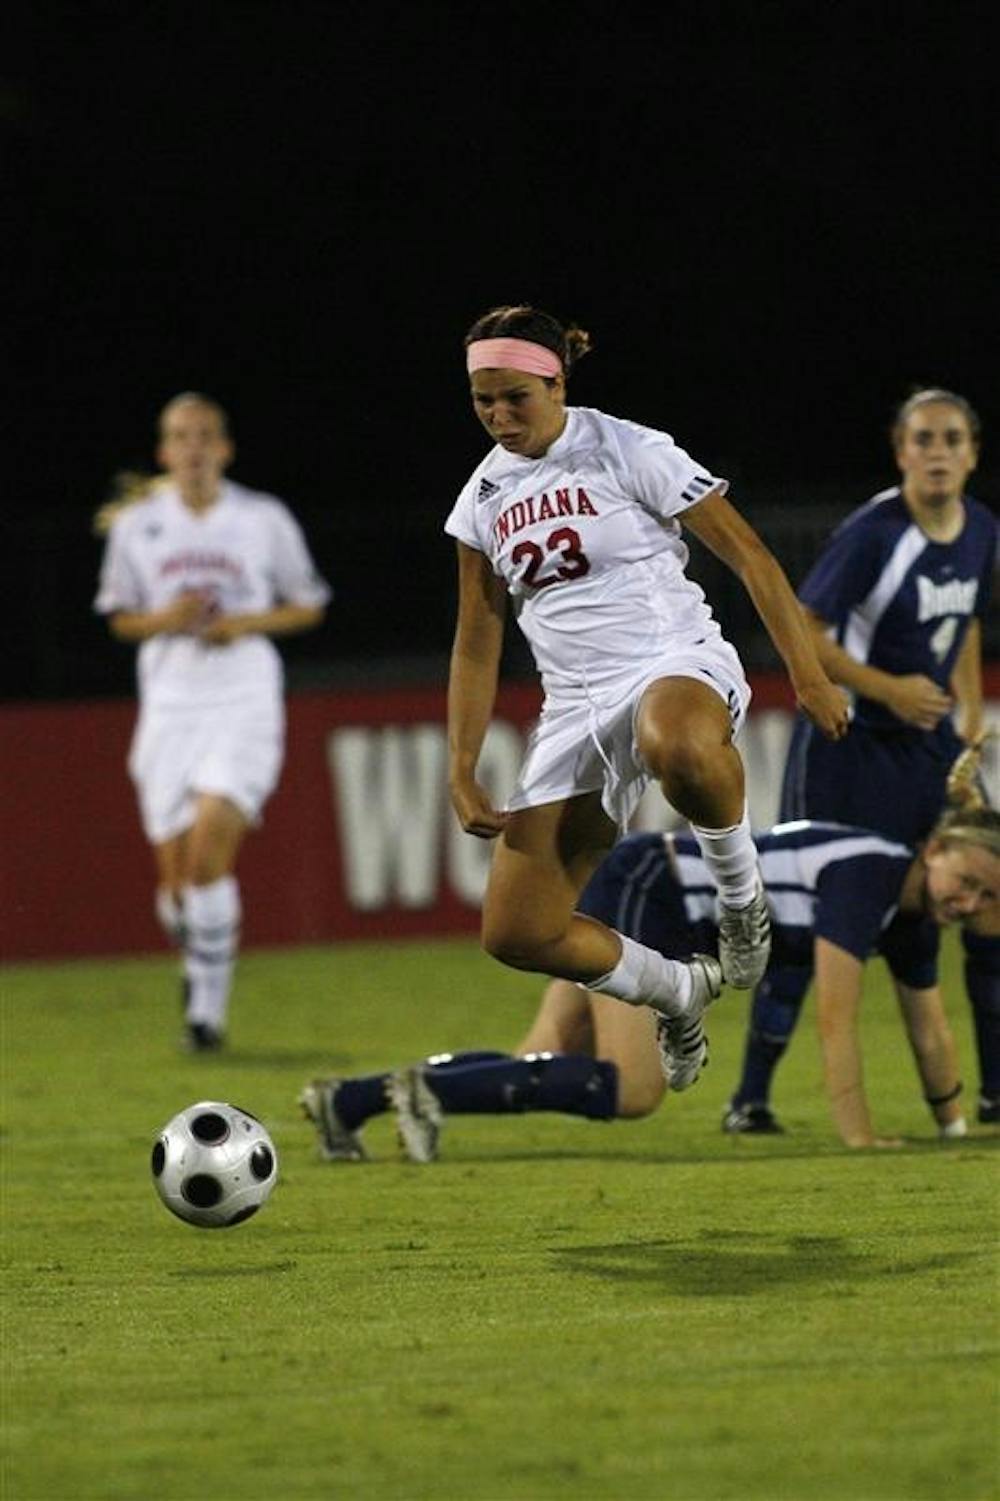 Junior Liz Holby plays the ball during a game verses Butler on Thursday night at Bill Armstrong Stadium. IU lost 2-1.